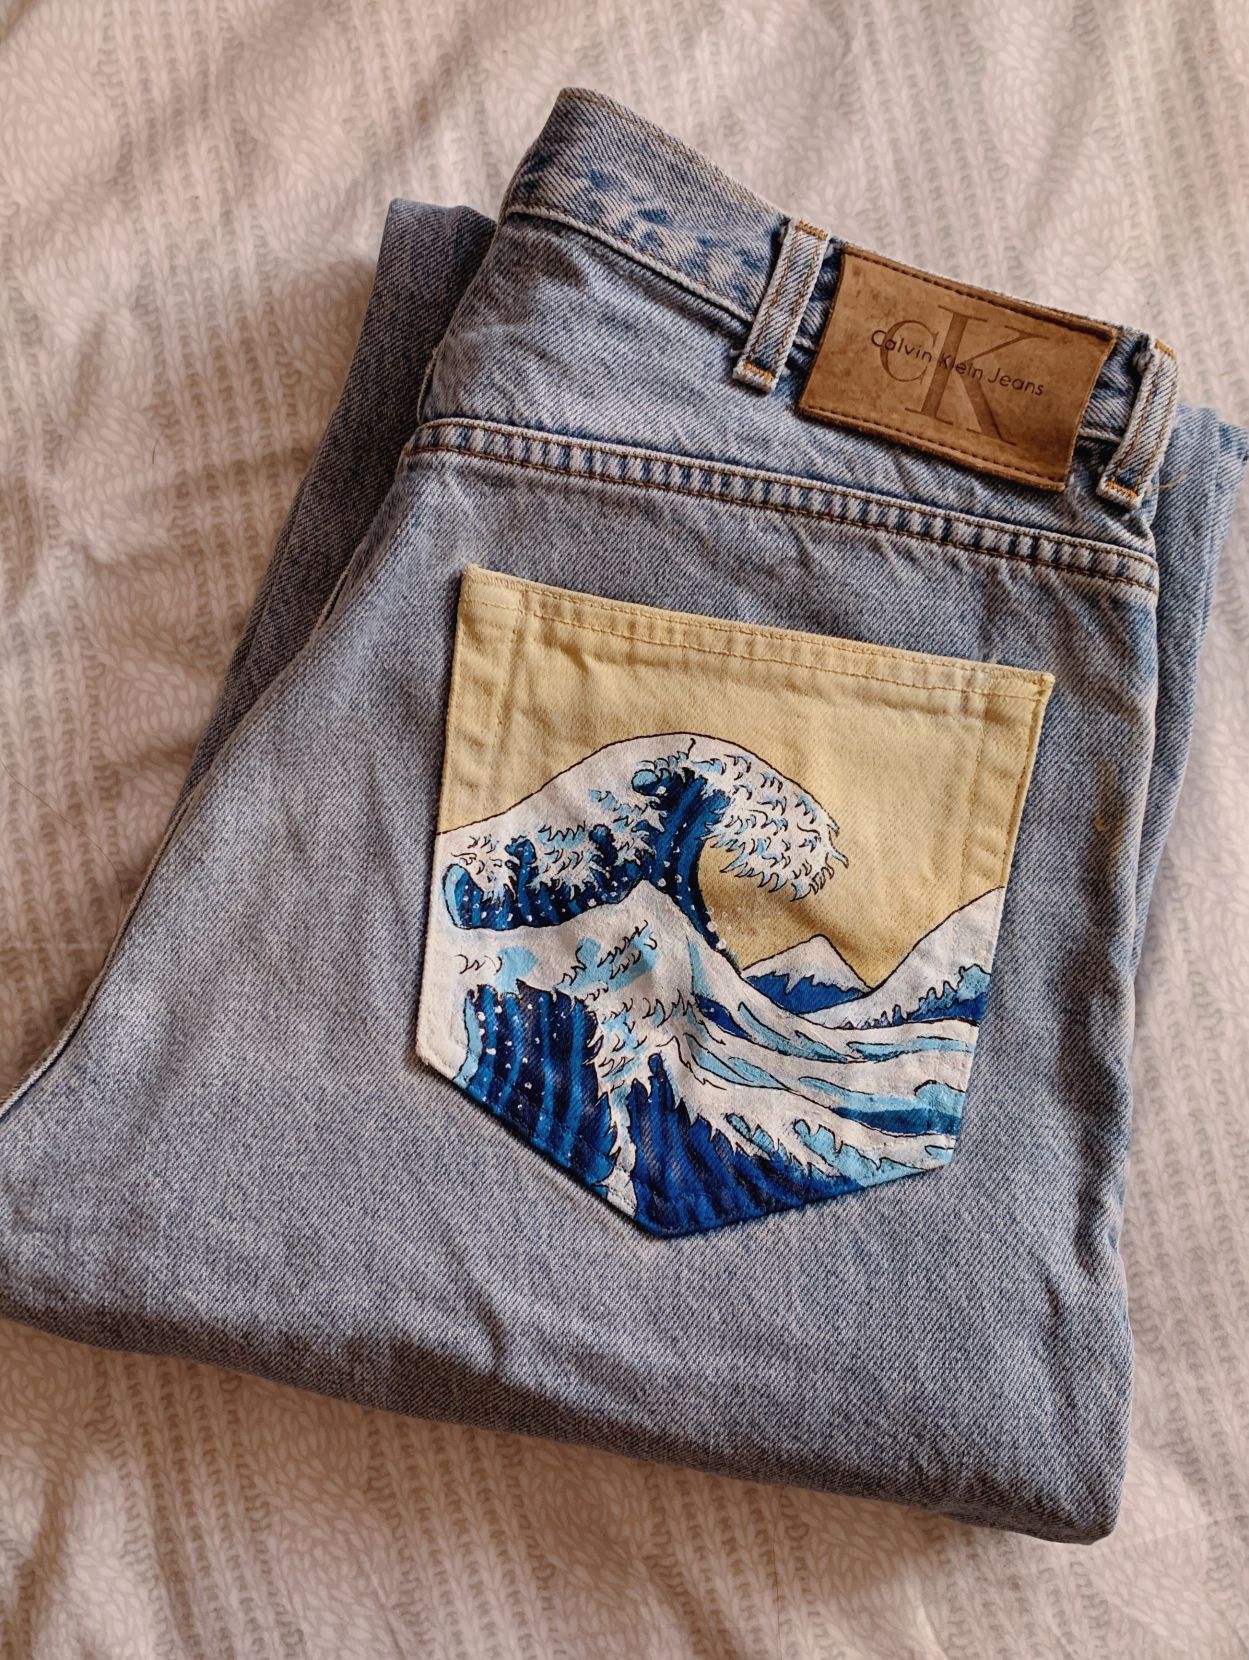 fire painting on jeans